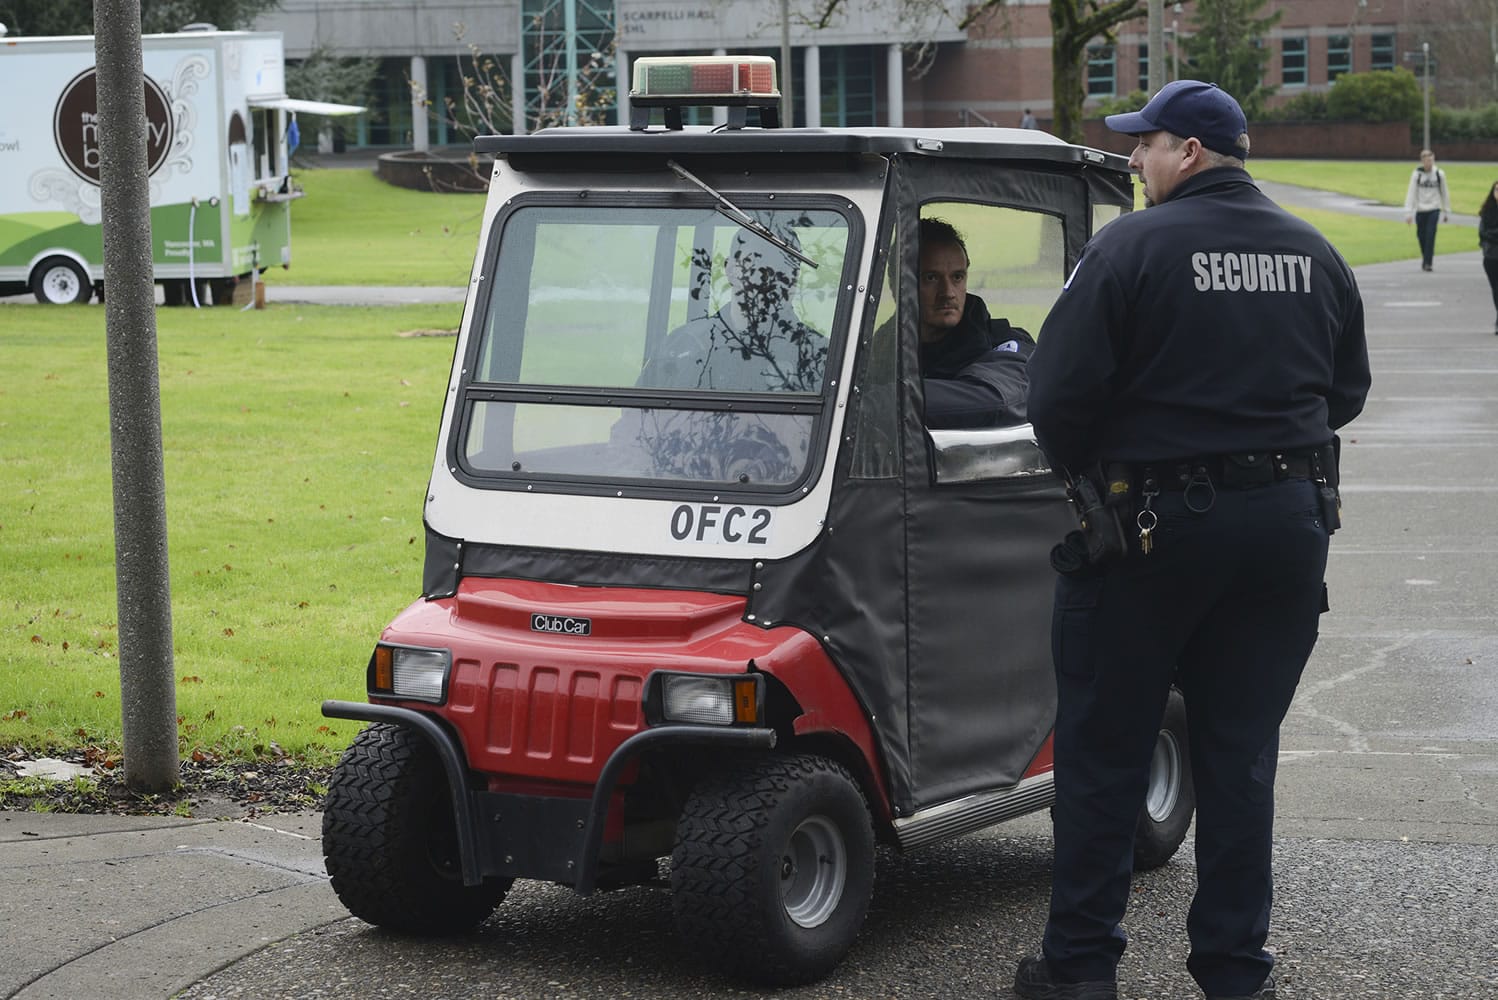 Unarmed security guards Benedetto Vesperini, in the golf cart, and Damon Grady patrol the Clark College campus in December.